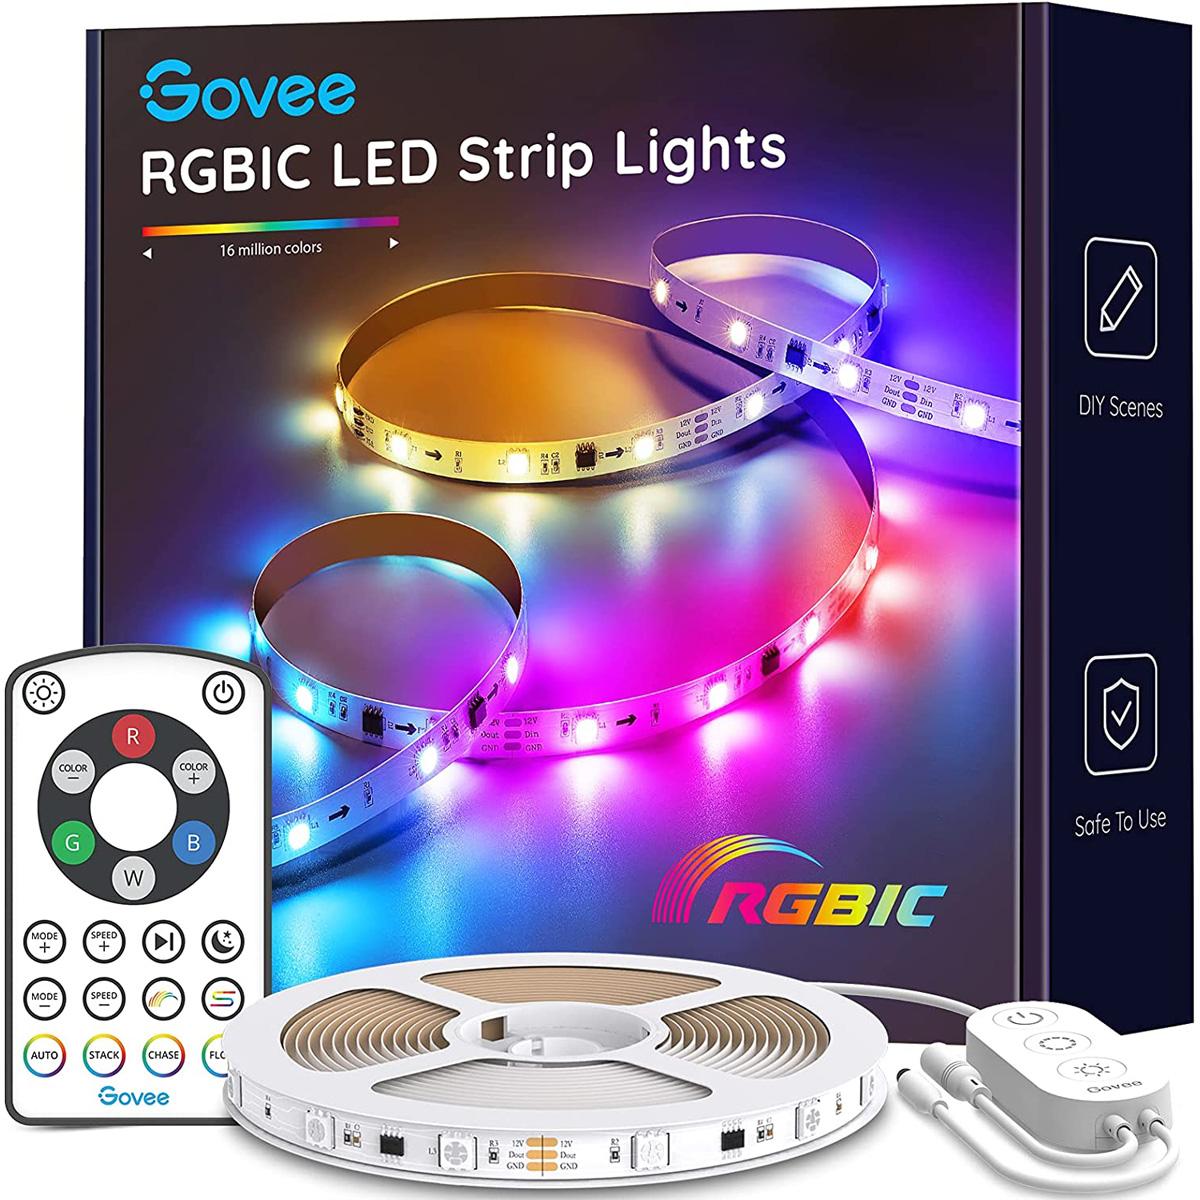 16ft Govee RGBIC LED Strip Lights for $9.99